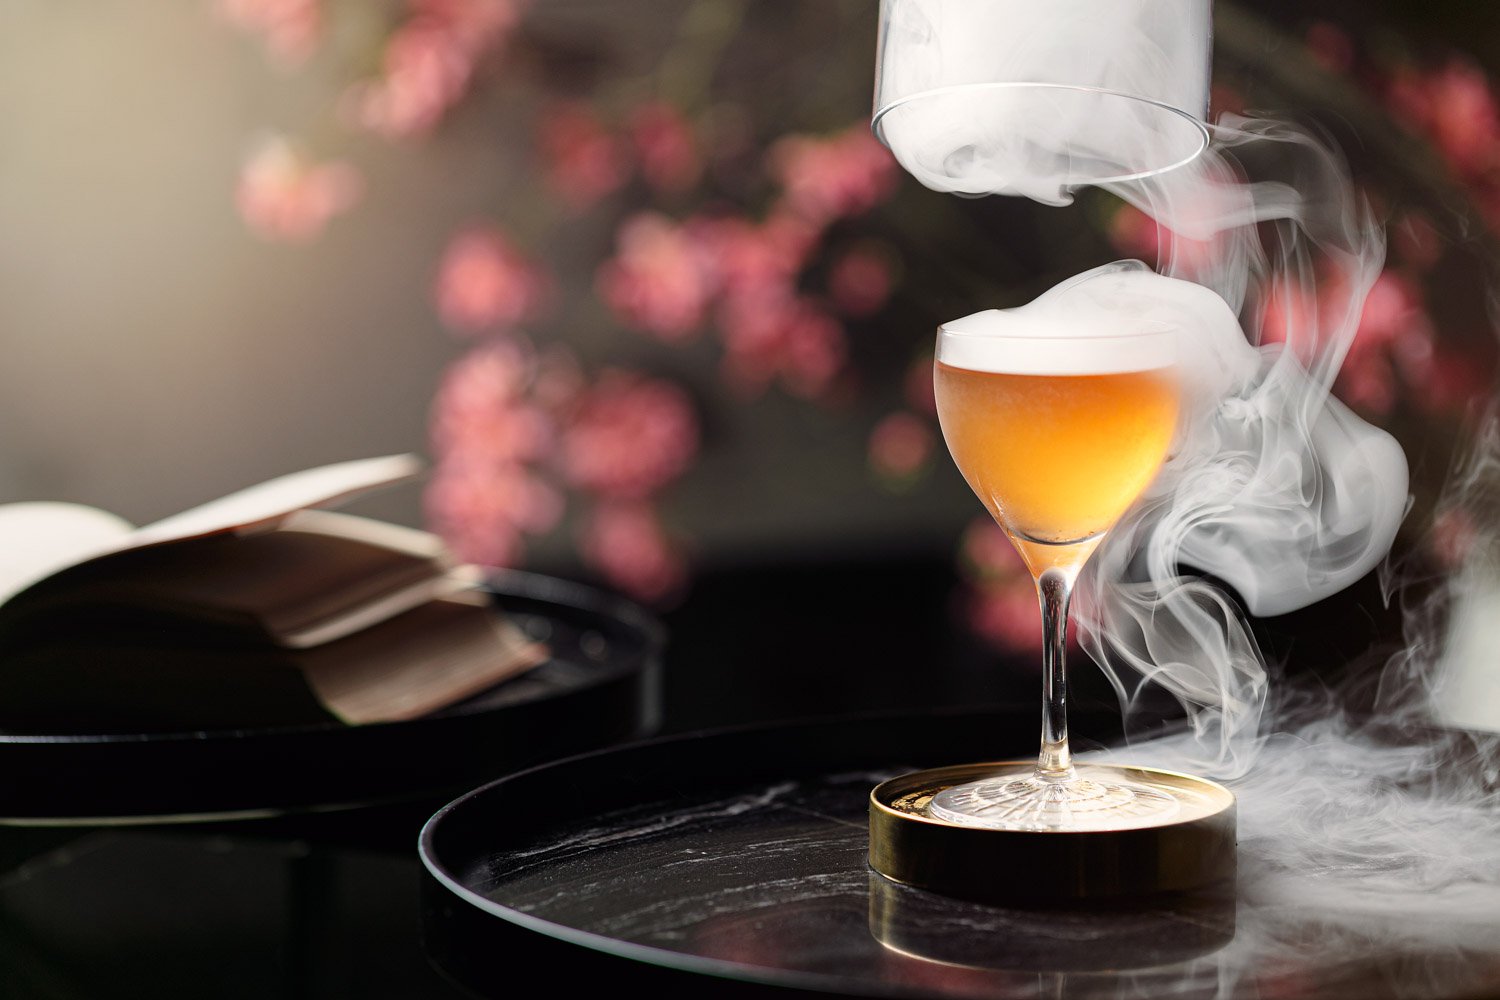 Drink photography with sakuras and smoke for hotel Kings court by jirilizler.jpg